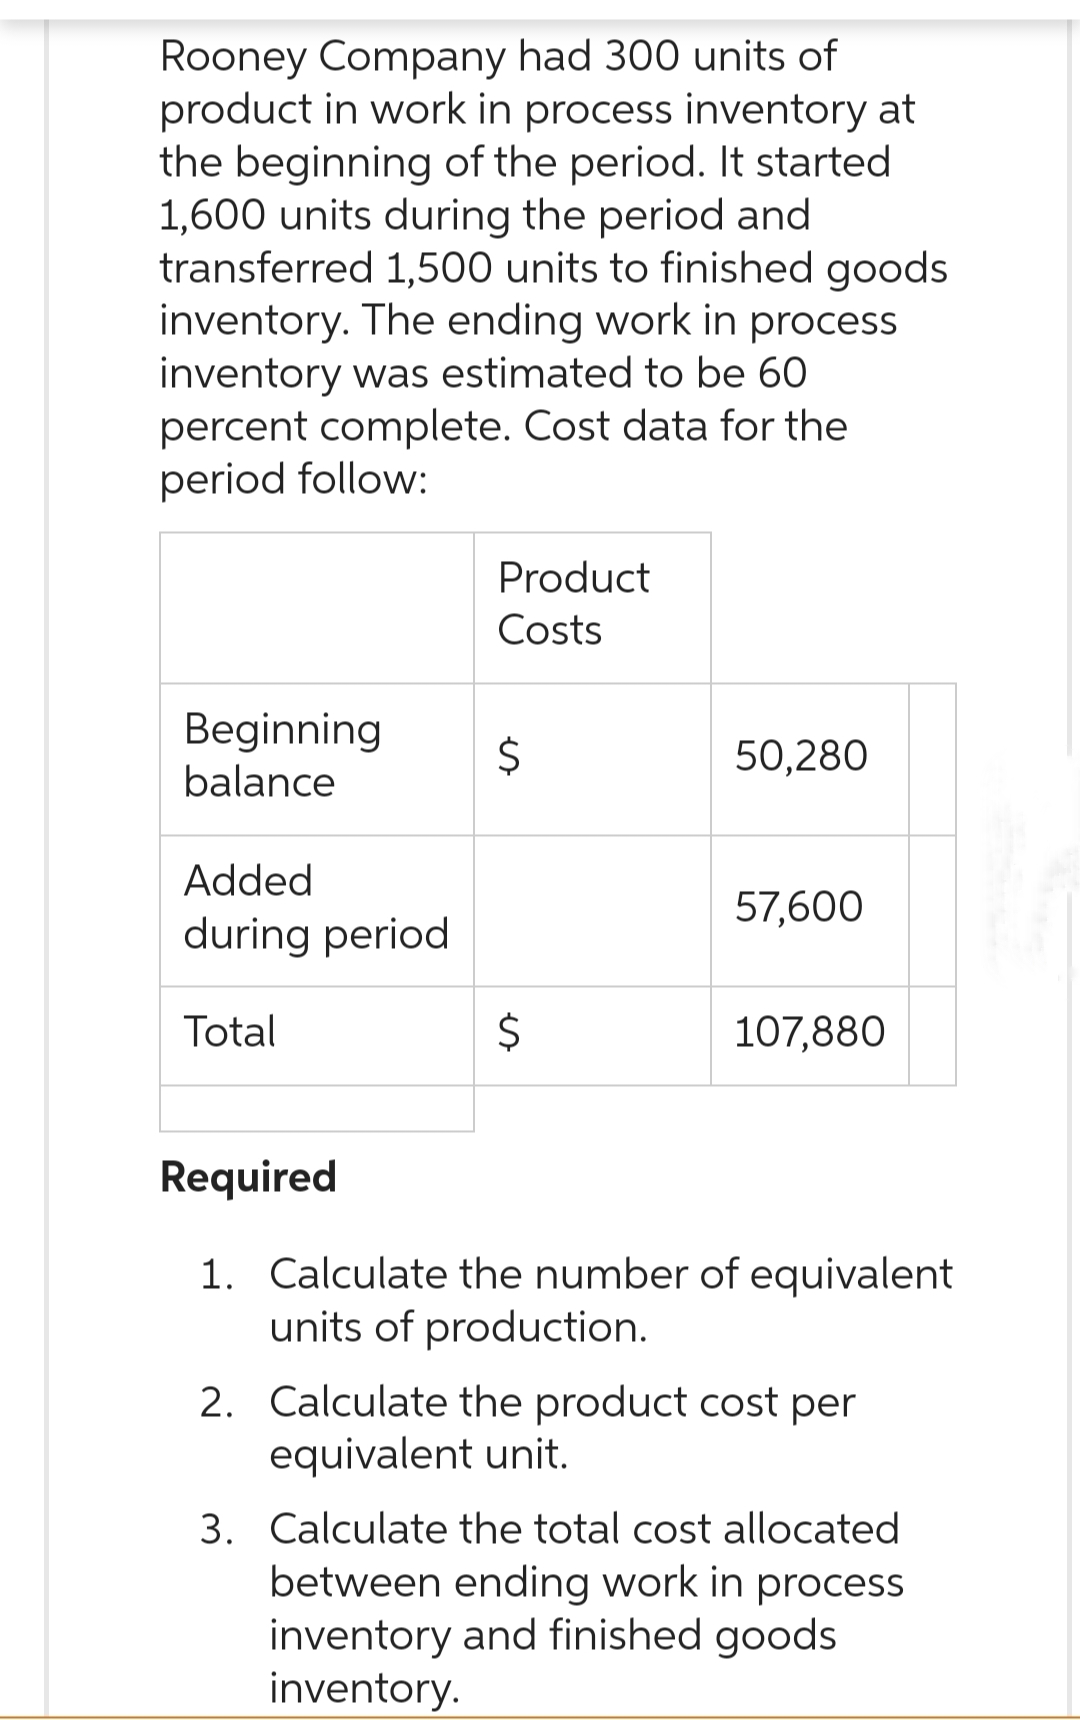 Rooney Company had 300 units of
product in work in process inventory at
the beginning of the period. It started
1,600 units during the period and
transferred 1,500 units to finished goods
inventory. The ending work in process.
inventory was estimated to be 60
percent complete. Cost data for the
period follow:
Product
Costs
Beginning
$
50,280
balance
Added
57,600
during period
Total
$
107,880
Required
1. Calculate the number of equivalent
units of production.
2. Calculate the product cost per
equivalent unit.
3. Calculate the total cost allocated
between ending work in process
inventory and finished goods
inventory.